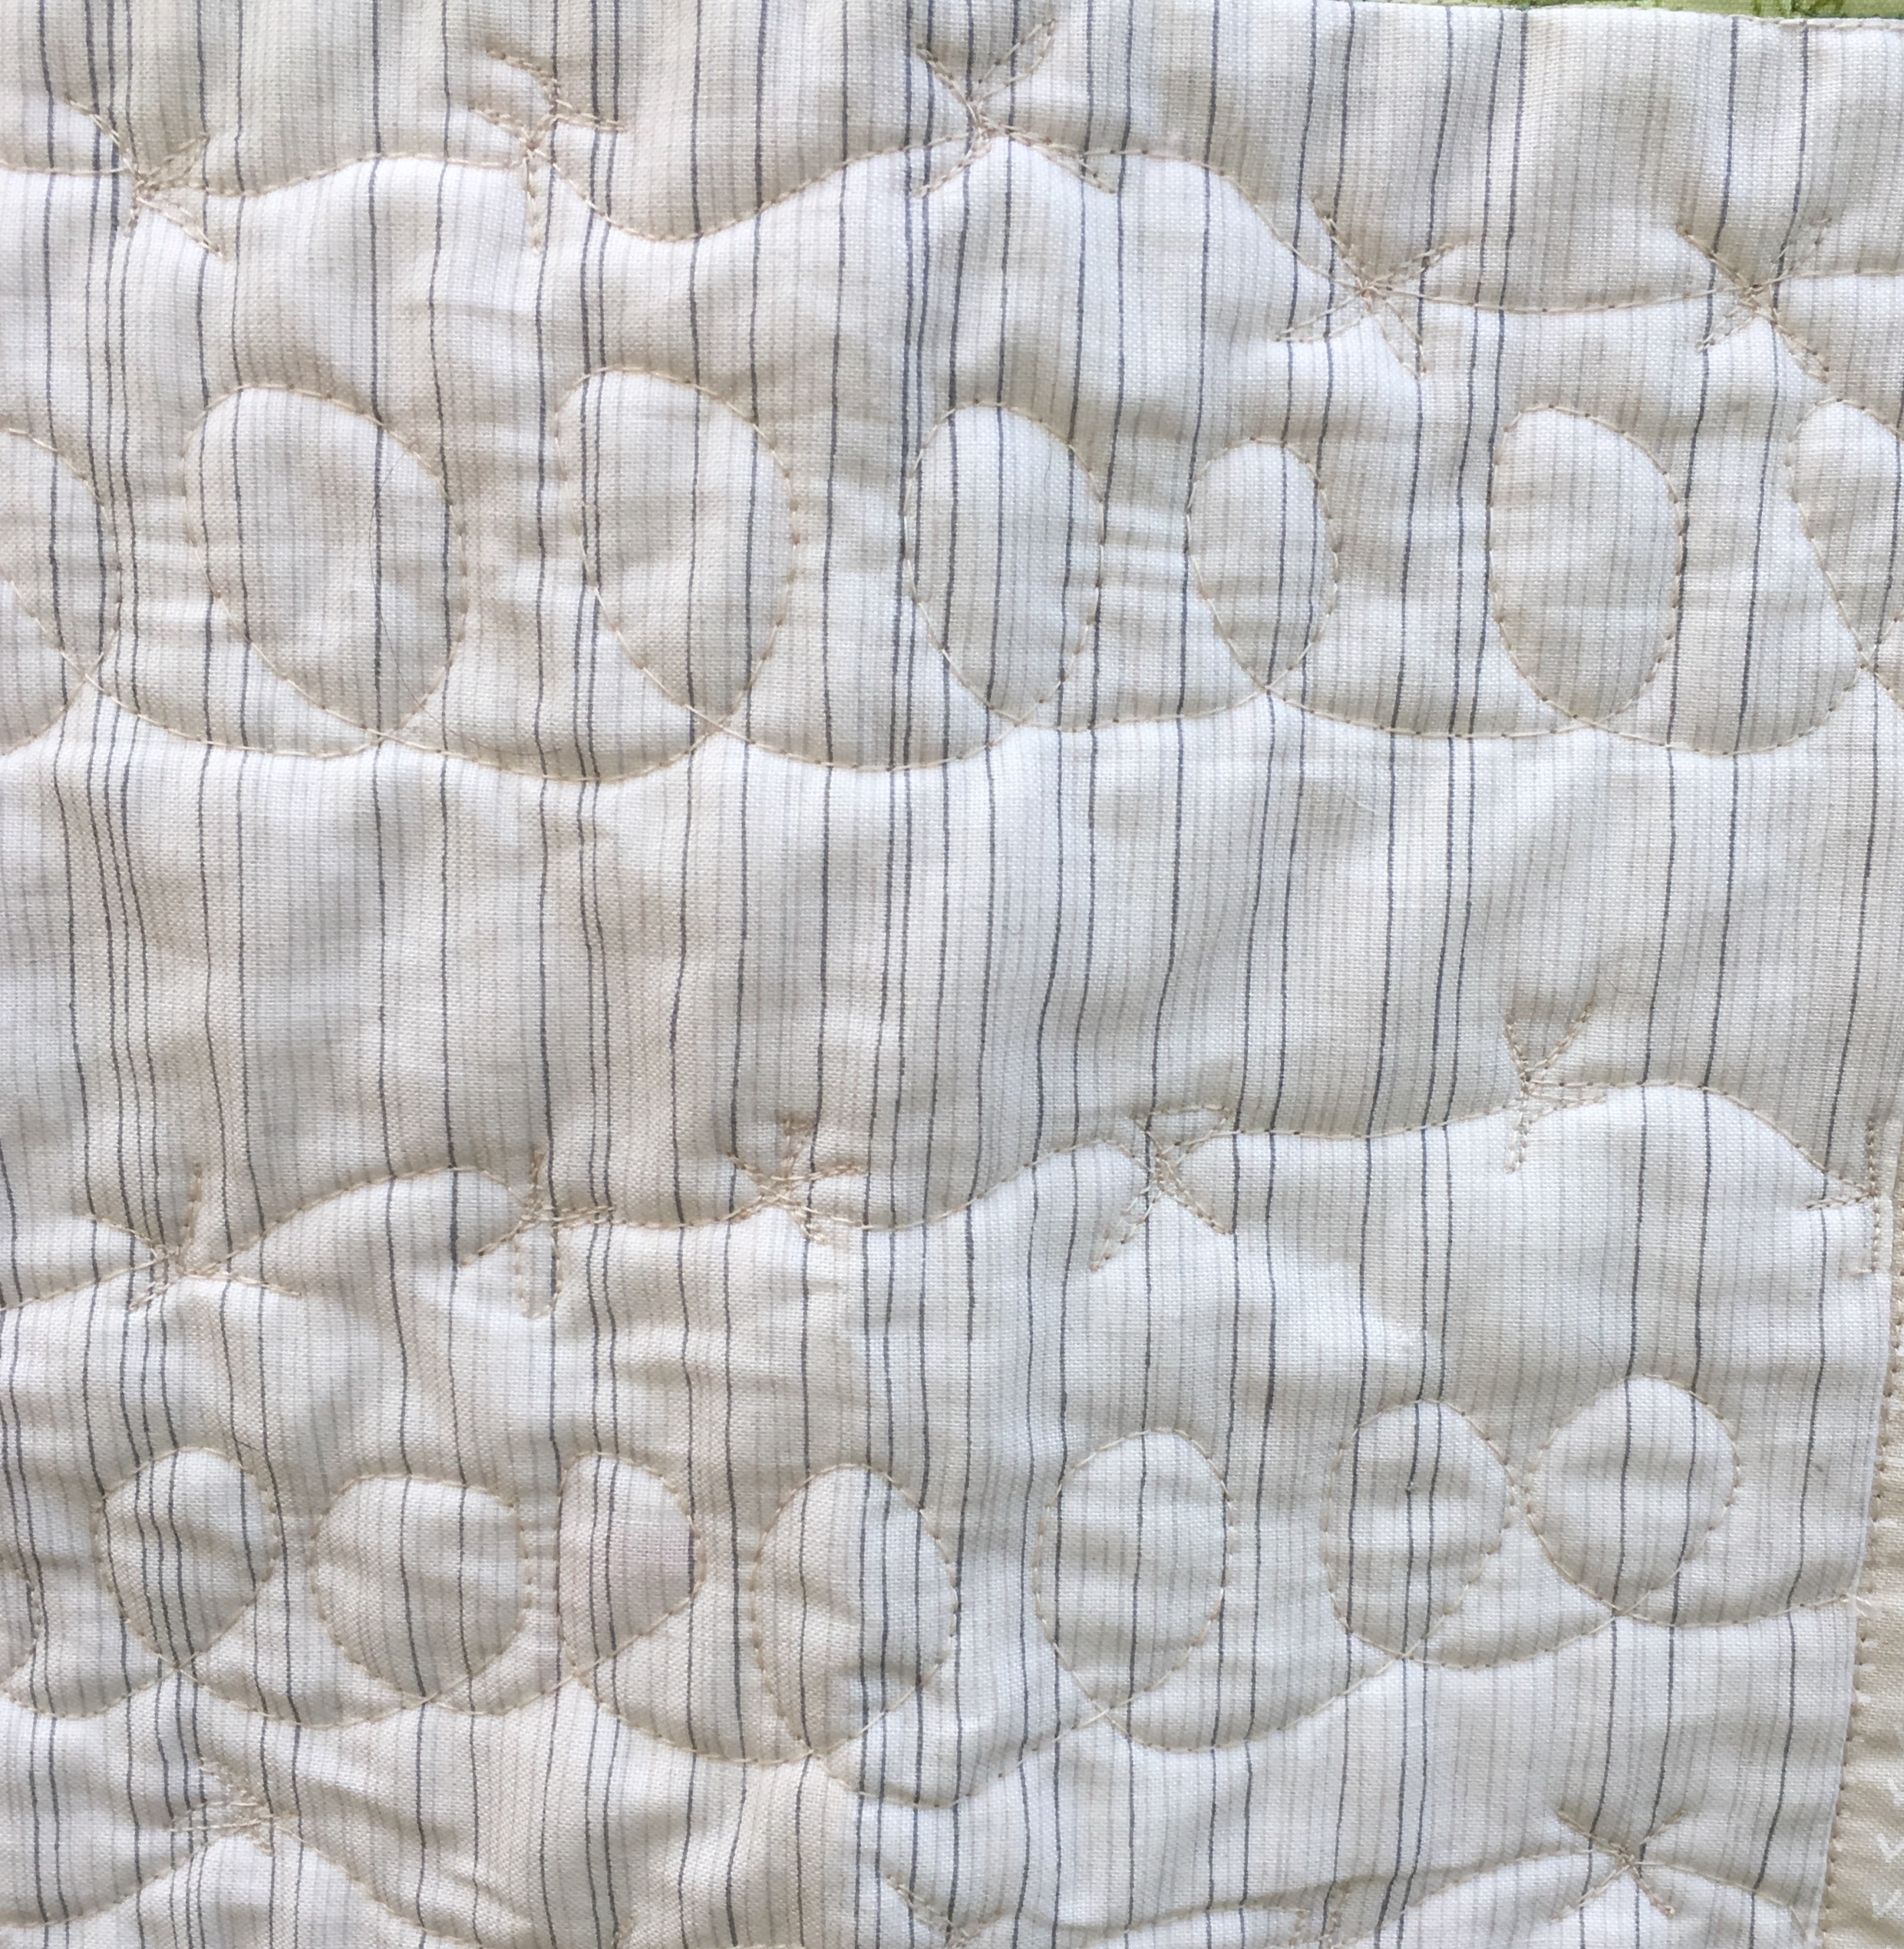 Poppy Quilt, Thoughts on Memorial Day 2019 — Sleeping Dog Quilts